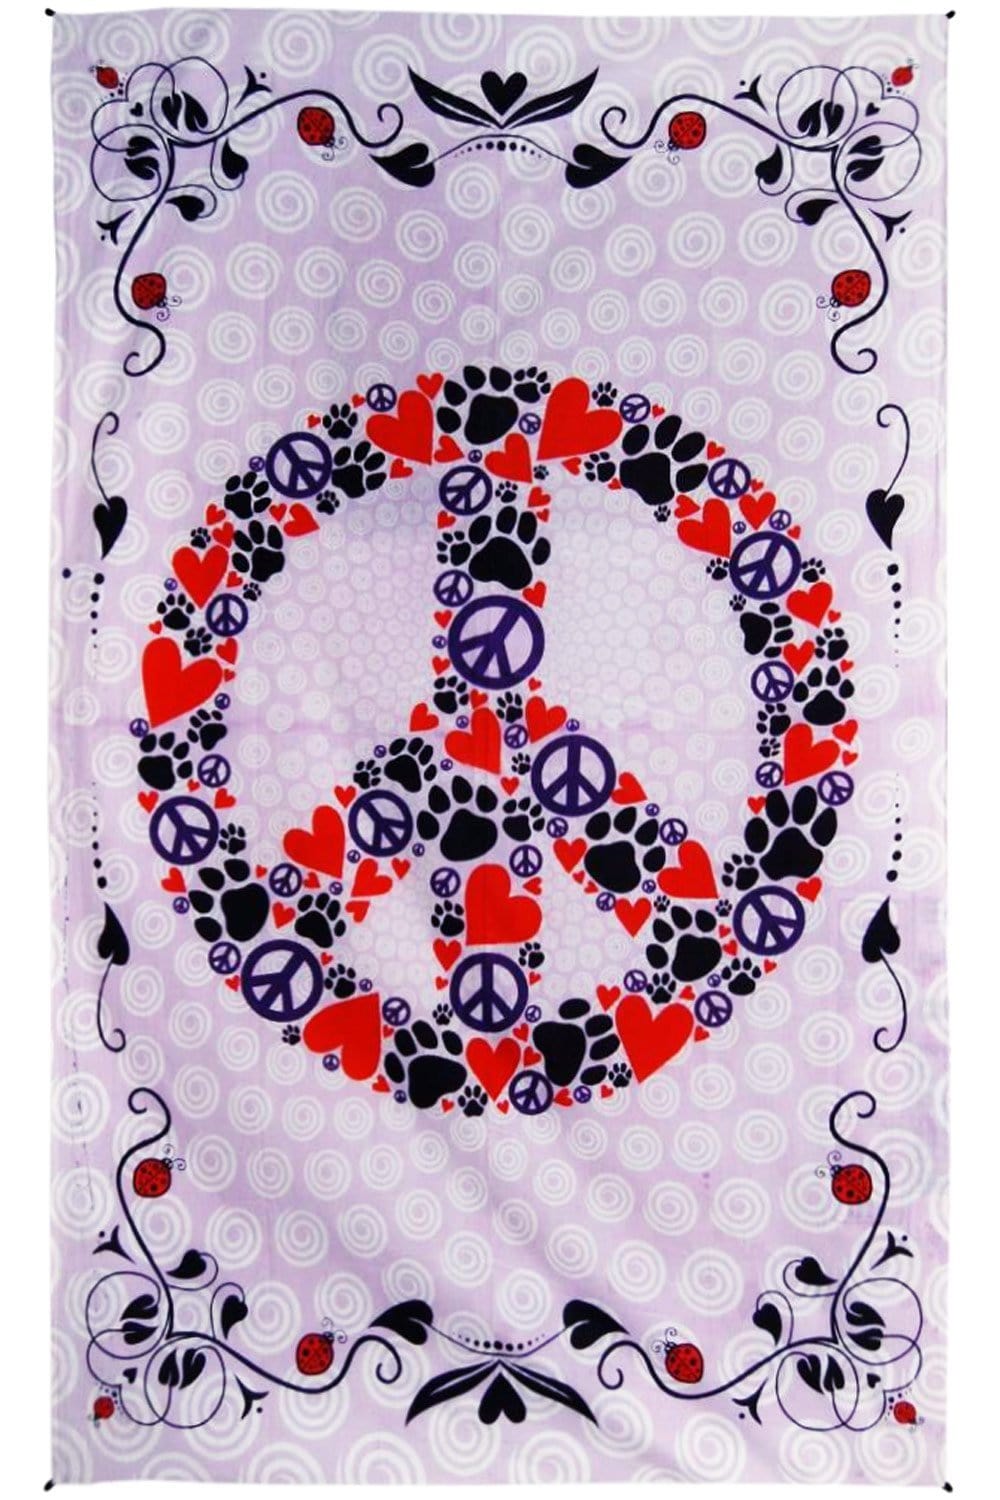 Tapestries Paws for Peace - Tapestry 100021